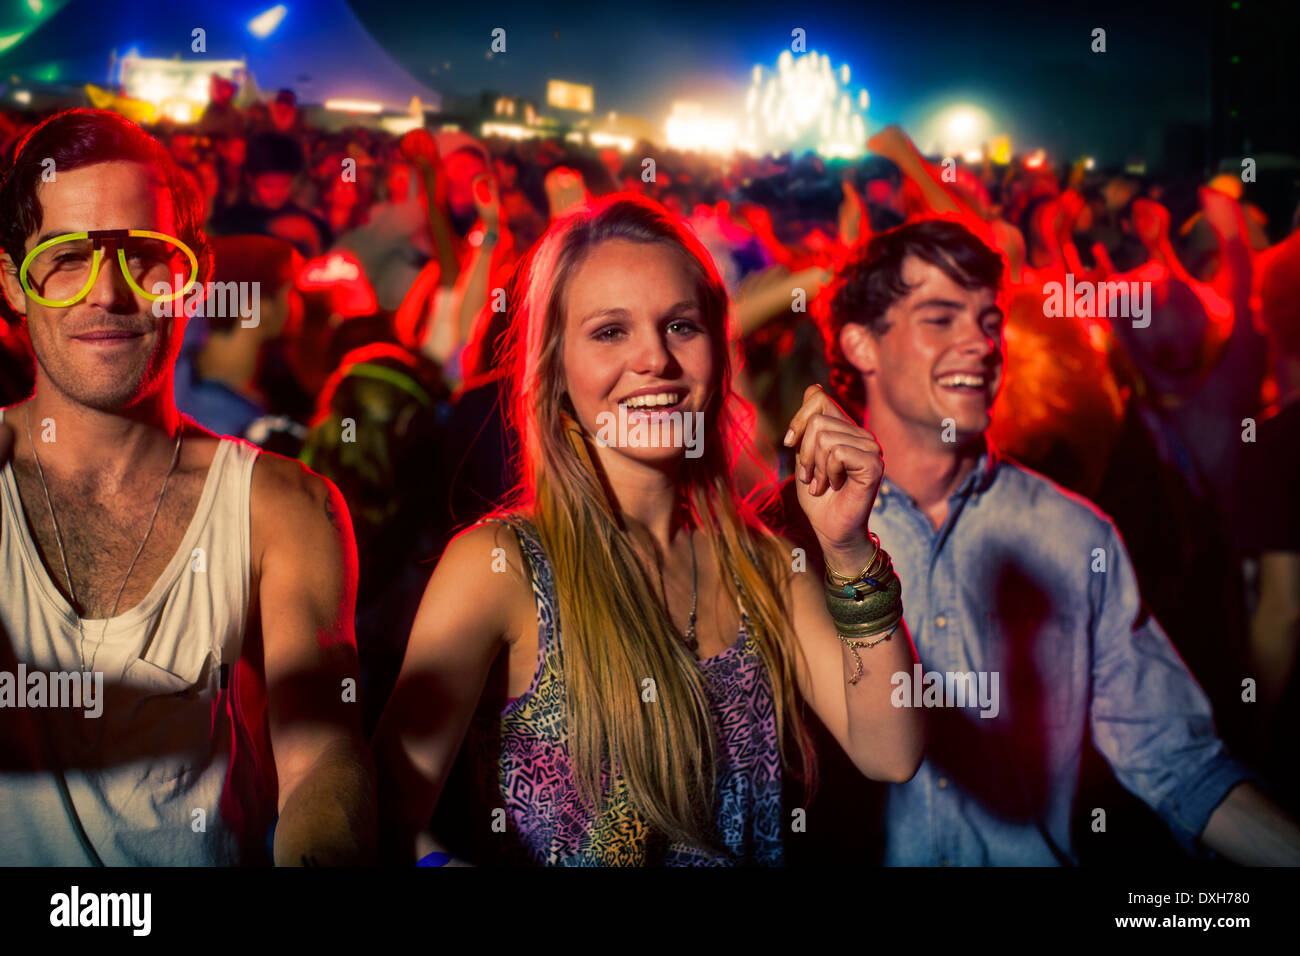 Fans dancing at music festival Stock Photo